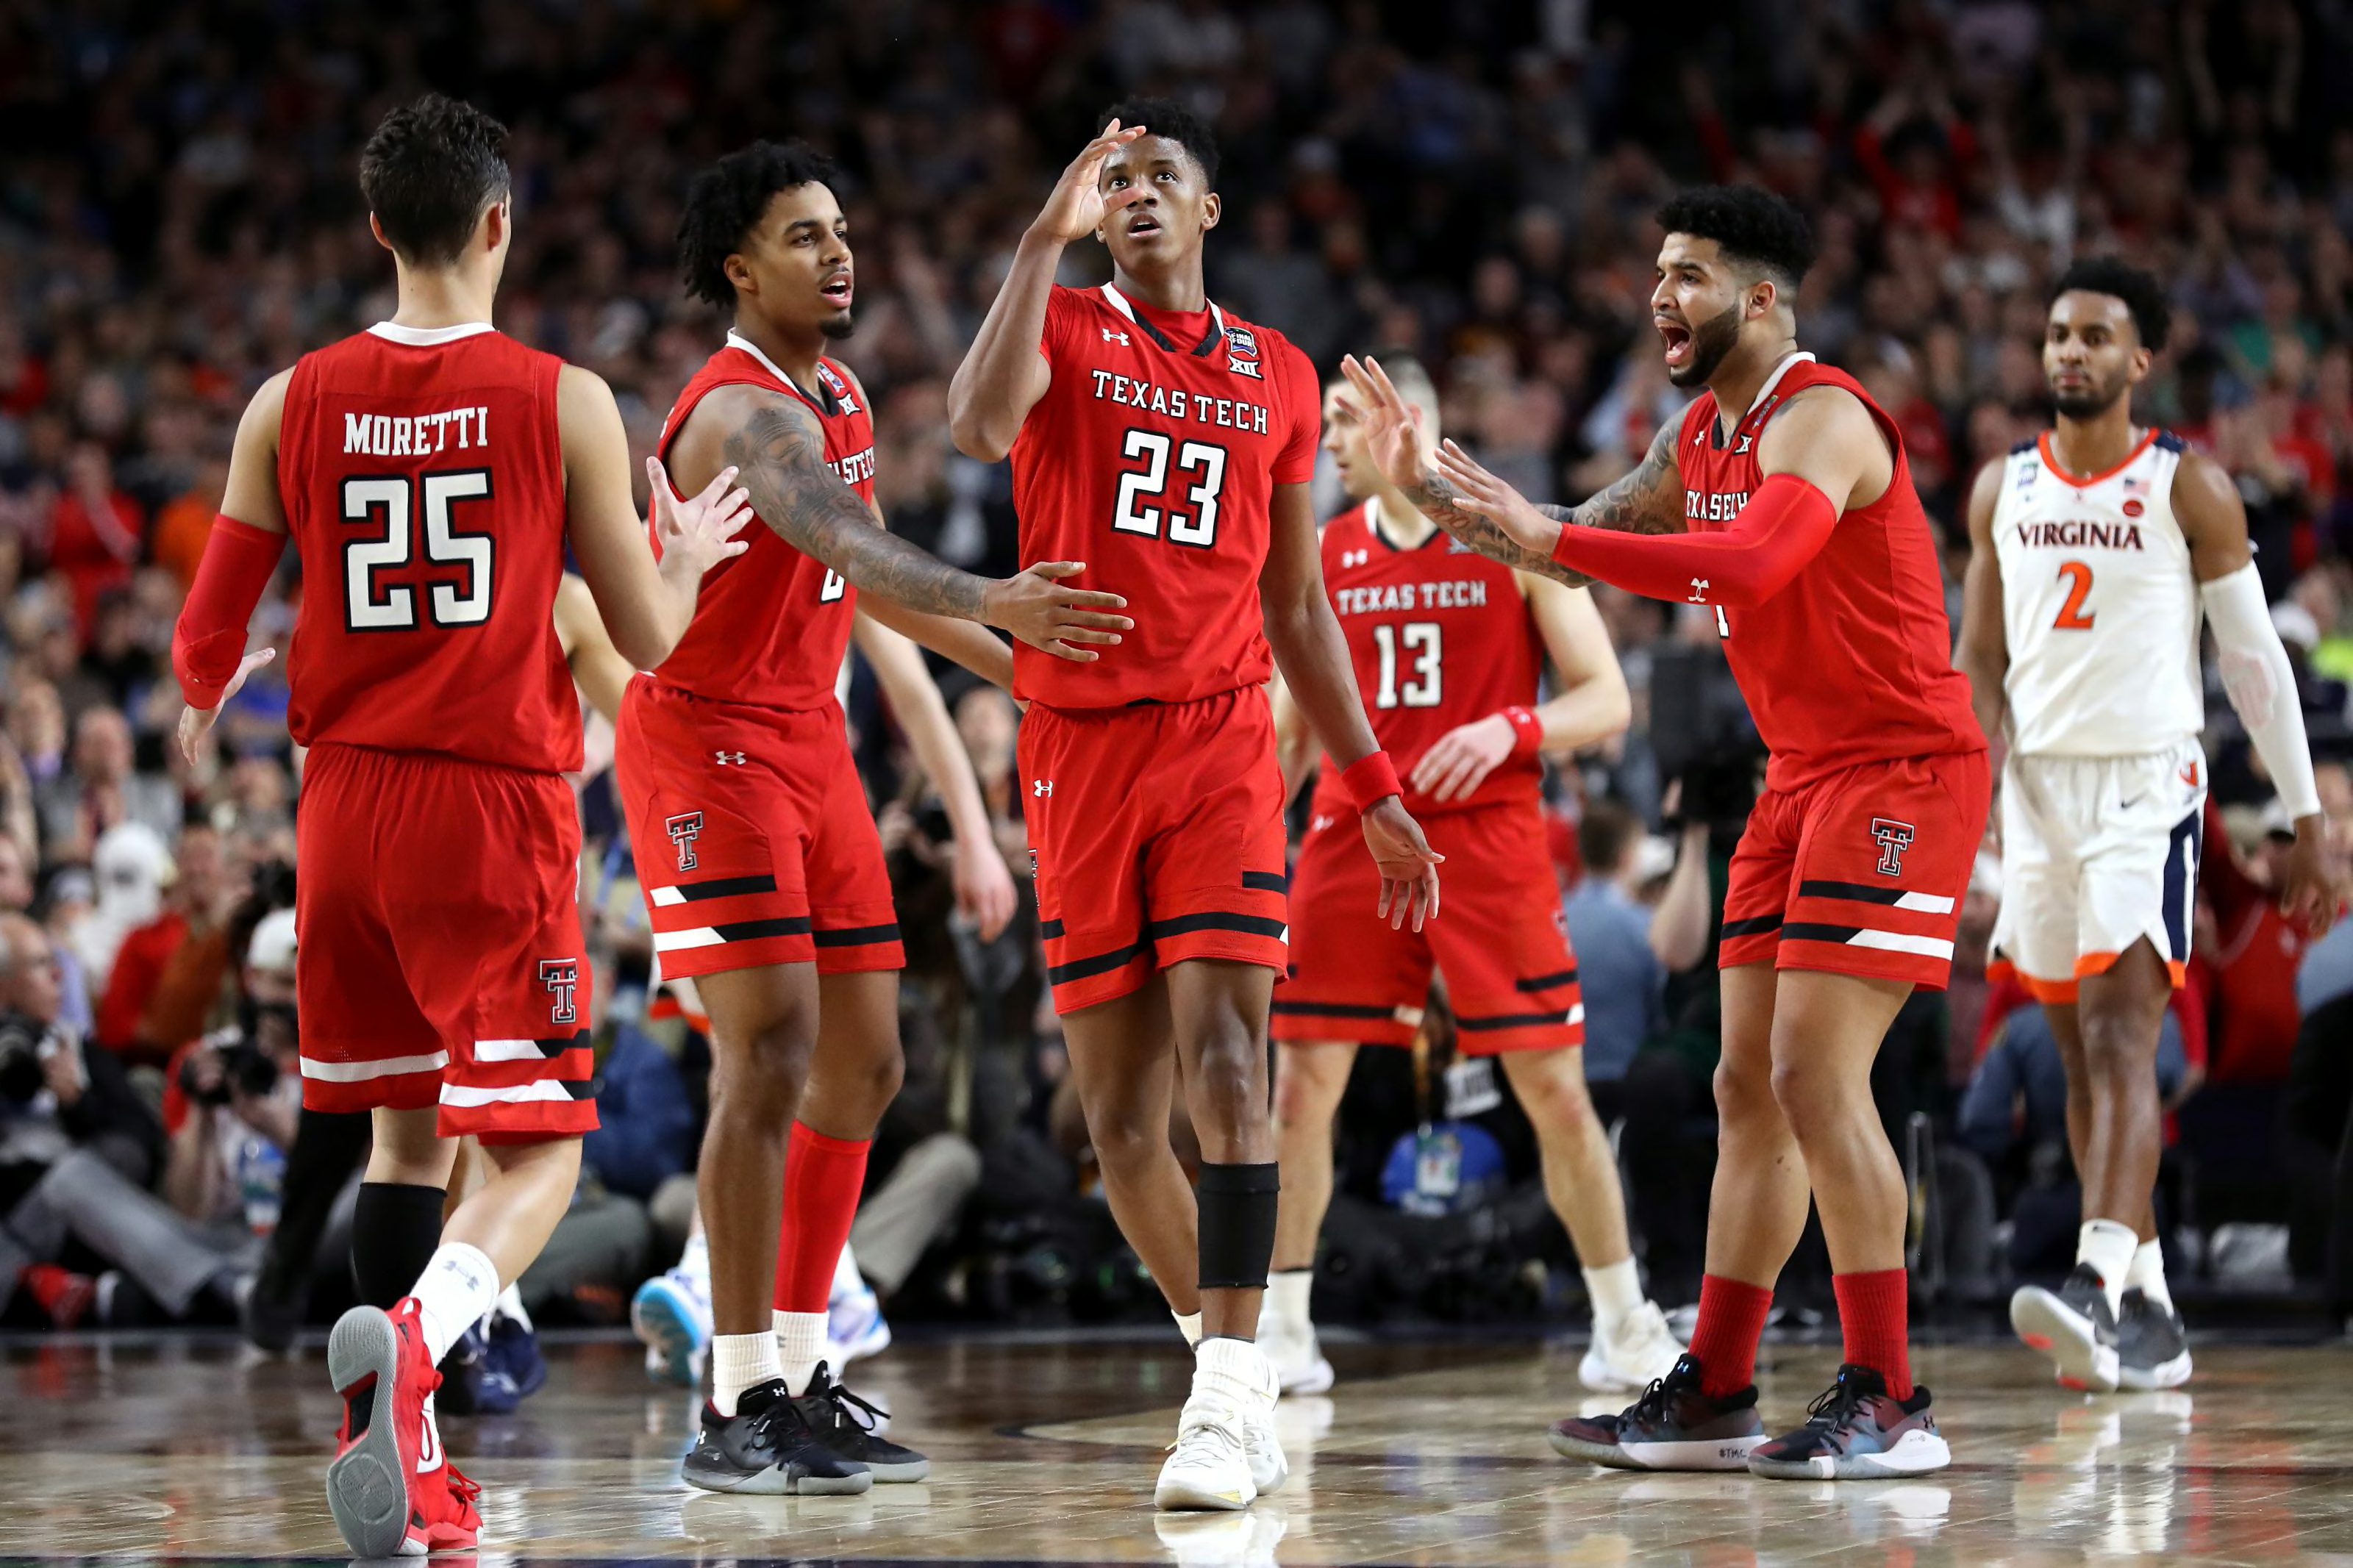 NCAA Basketball Ranking top conferences by 2019 recruiting classes